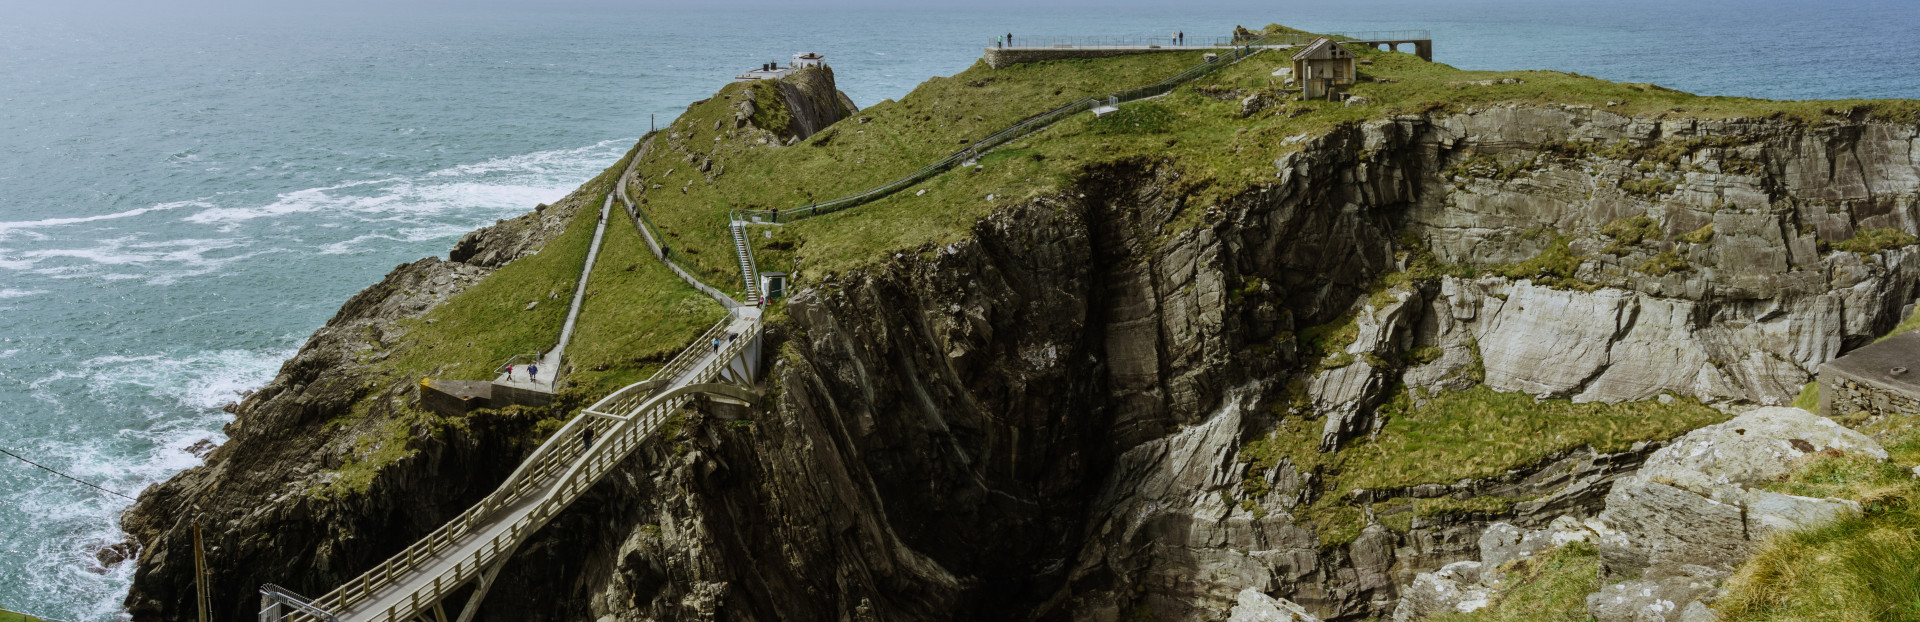 This 47-mile road curves around Mizen Head’s shores and was described by poet Seamus Heaney as “Water and ground in their extremity”.<p><a href="https://www.msn.com/en-us/community/channel/vid-7xx8mnucu55yw63we9va2gwr7uihbxwc68fxqp25x6tg4ftibpra?cvid=94631541bc0f4f89bfd59158d696ad7e">Follow us and access great exclusive content every day</a></p>